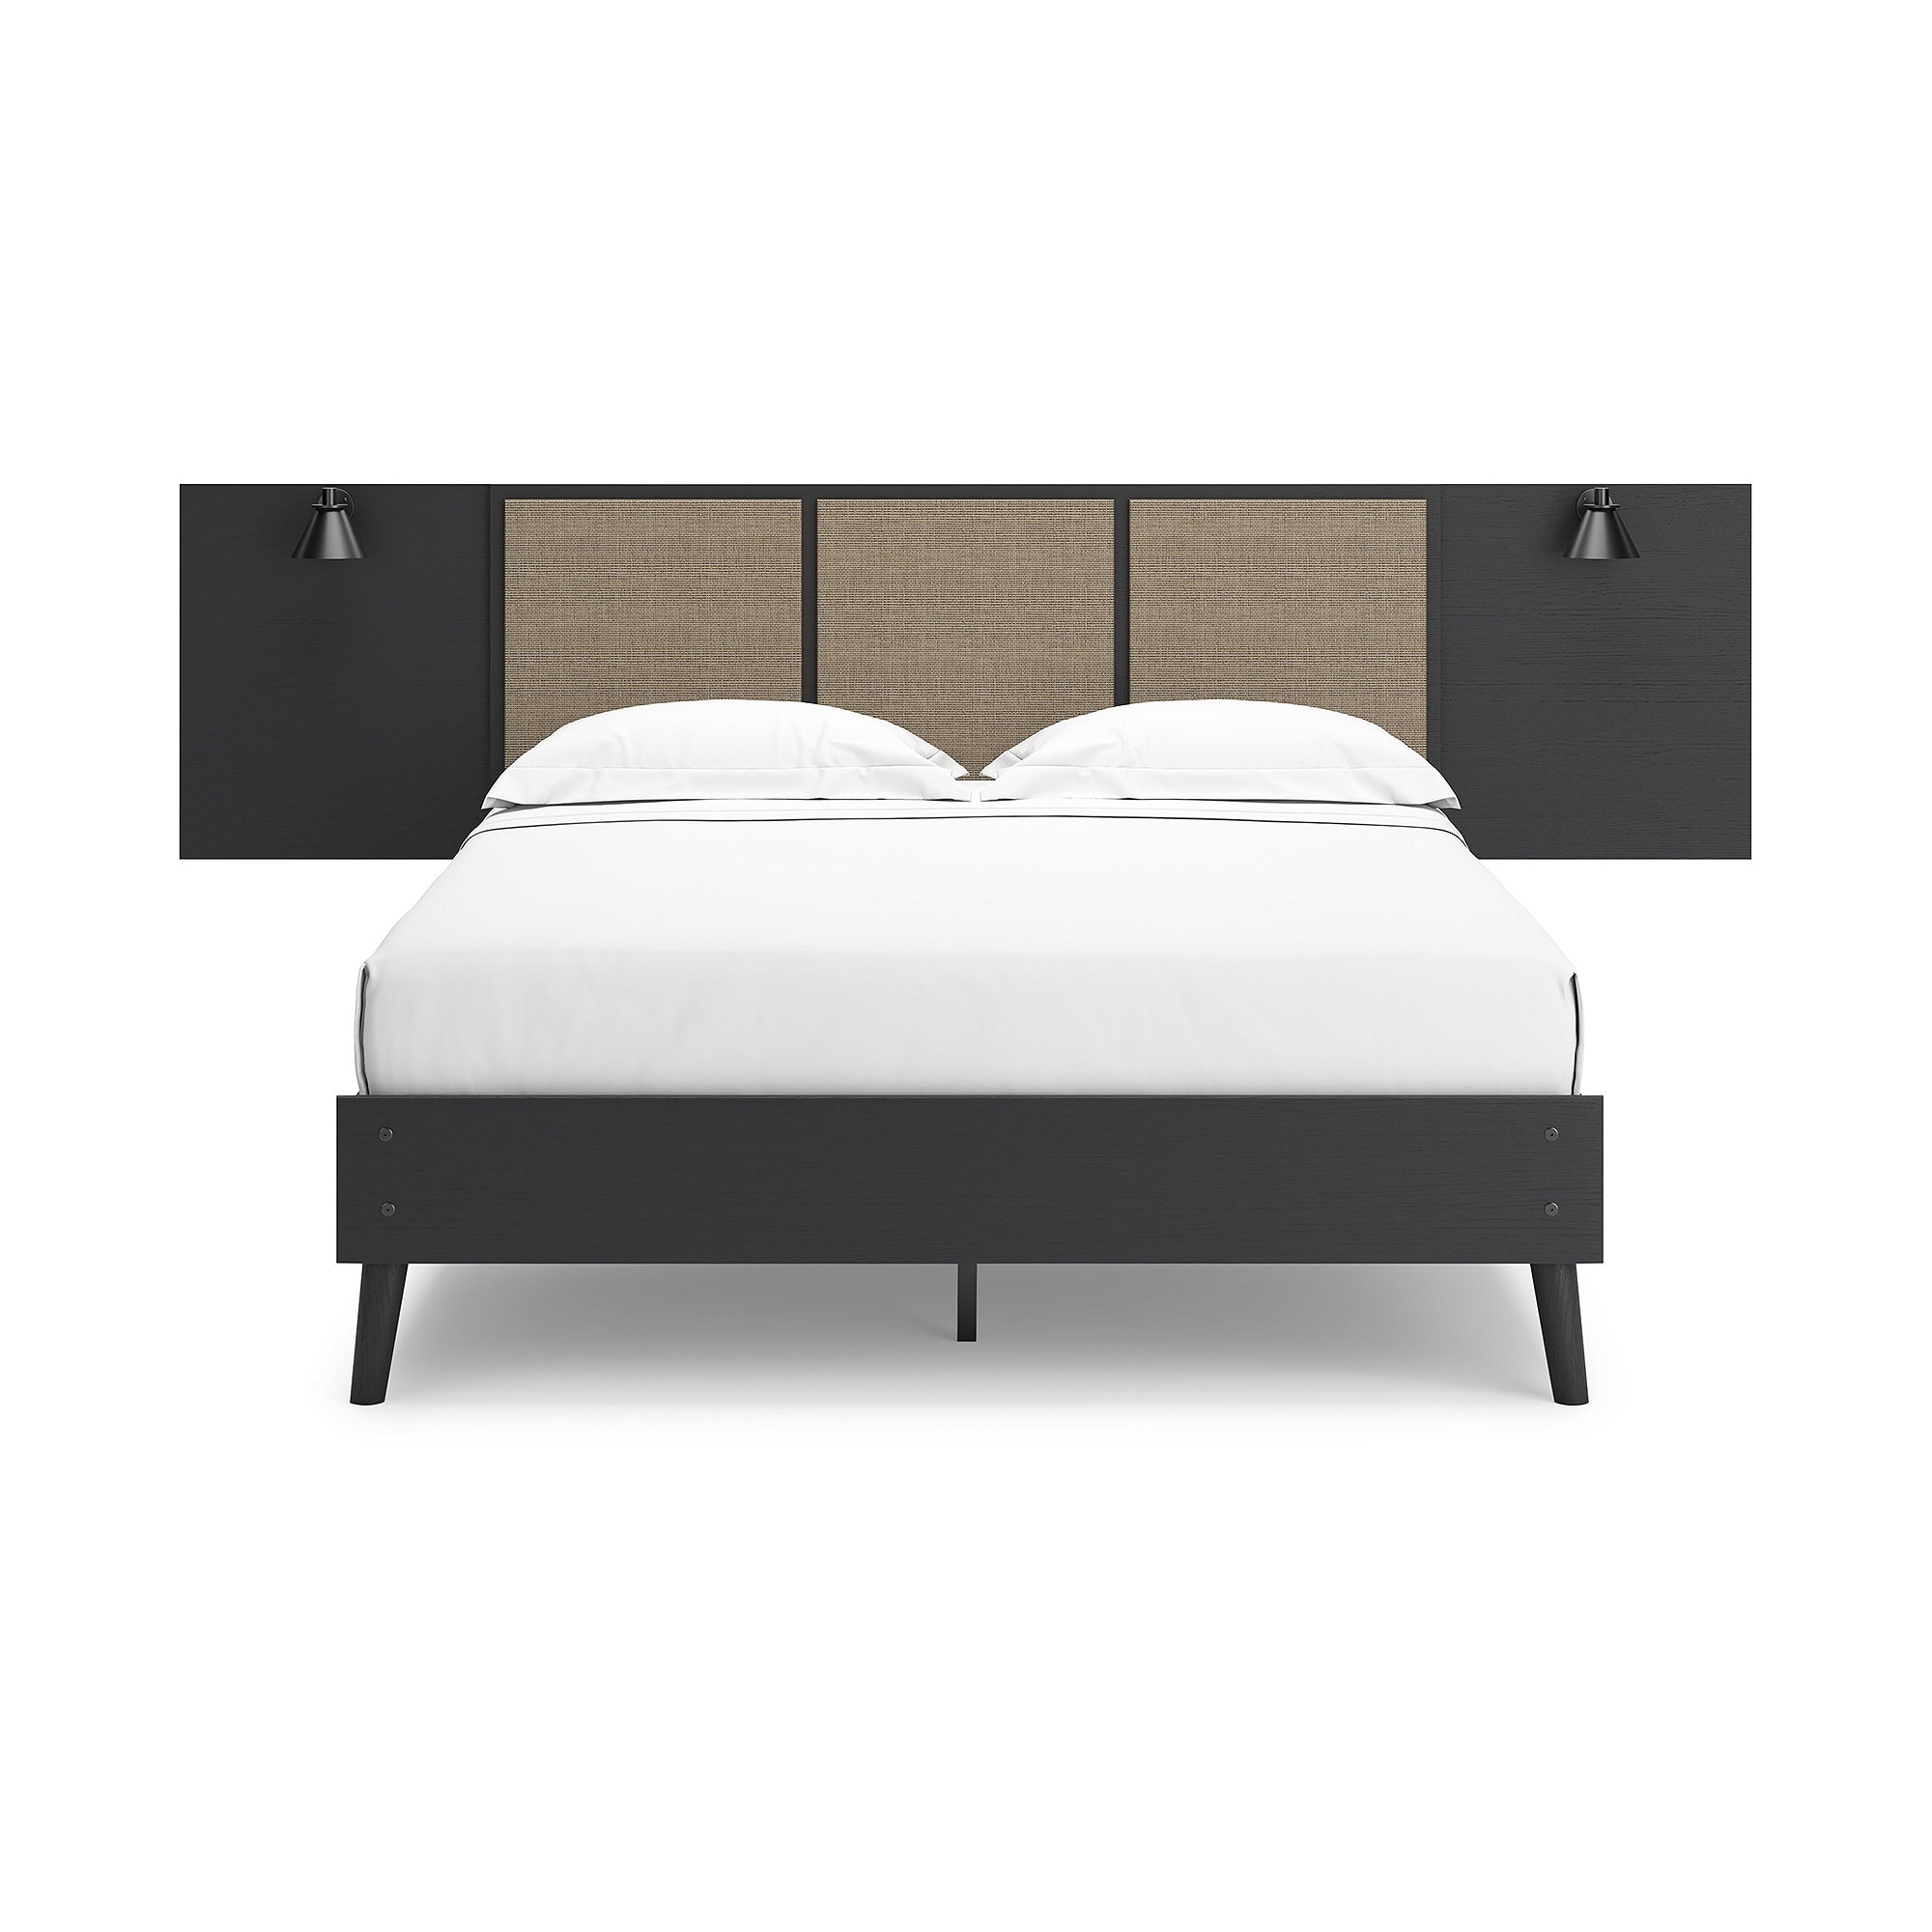 Signature Design by Ashley Charlang Black/Beige Platform Bed with 2 Extensions